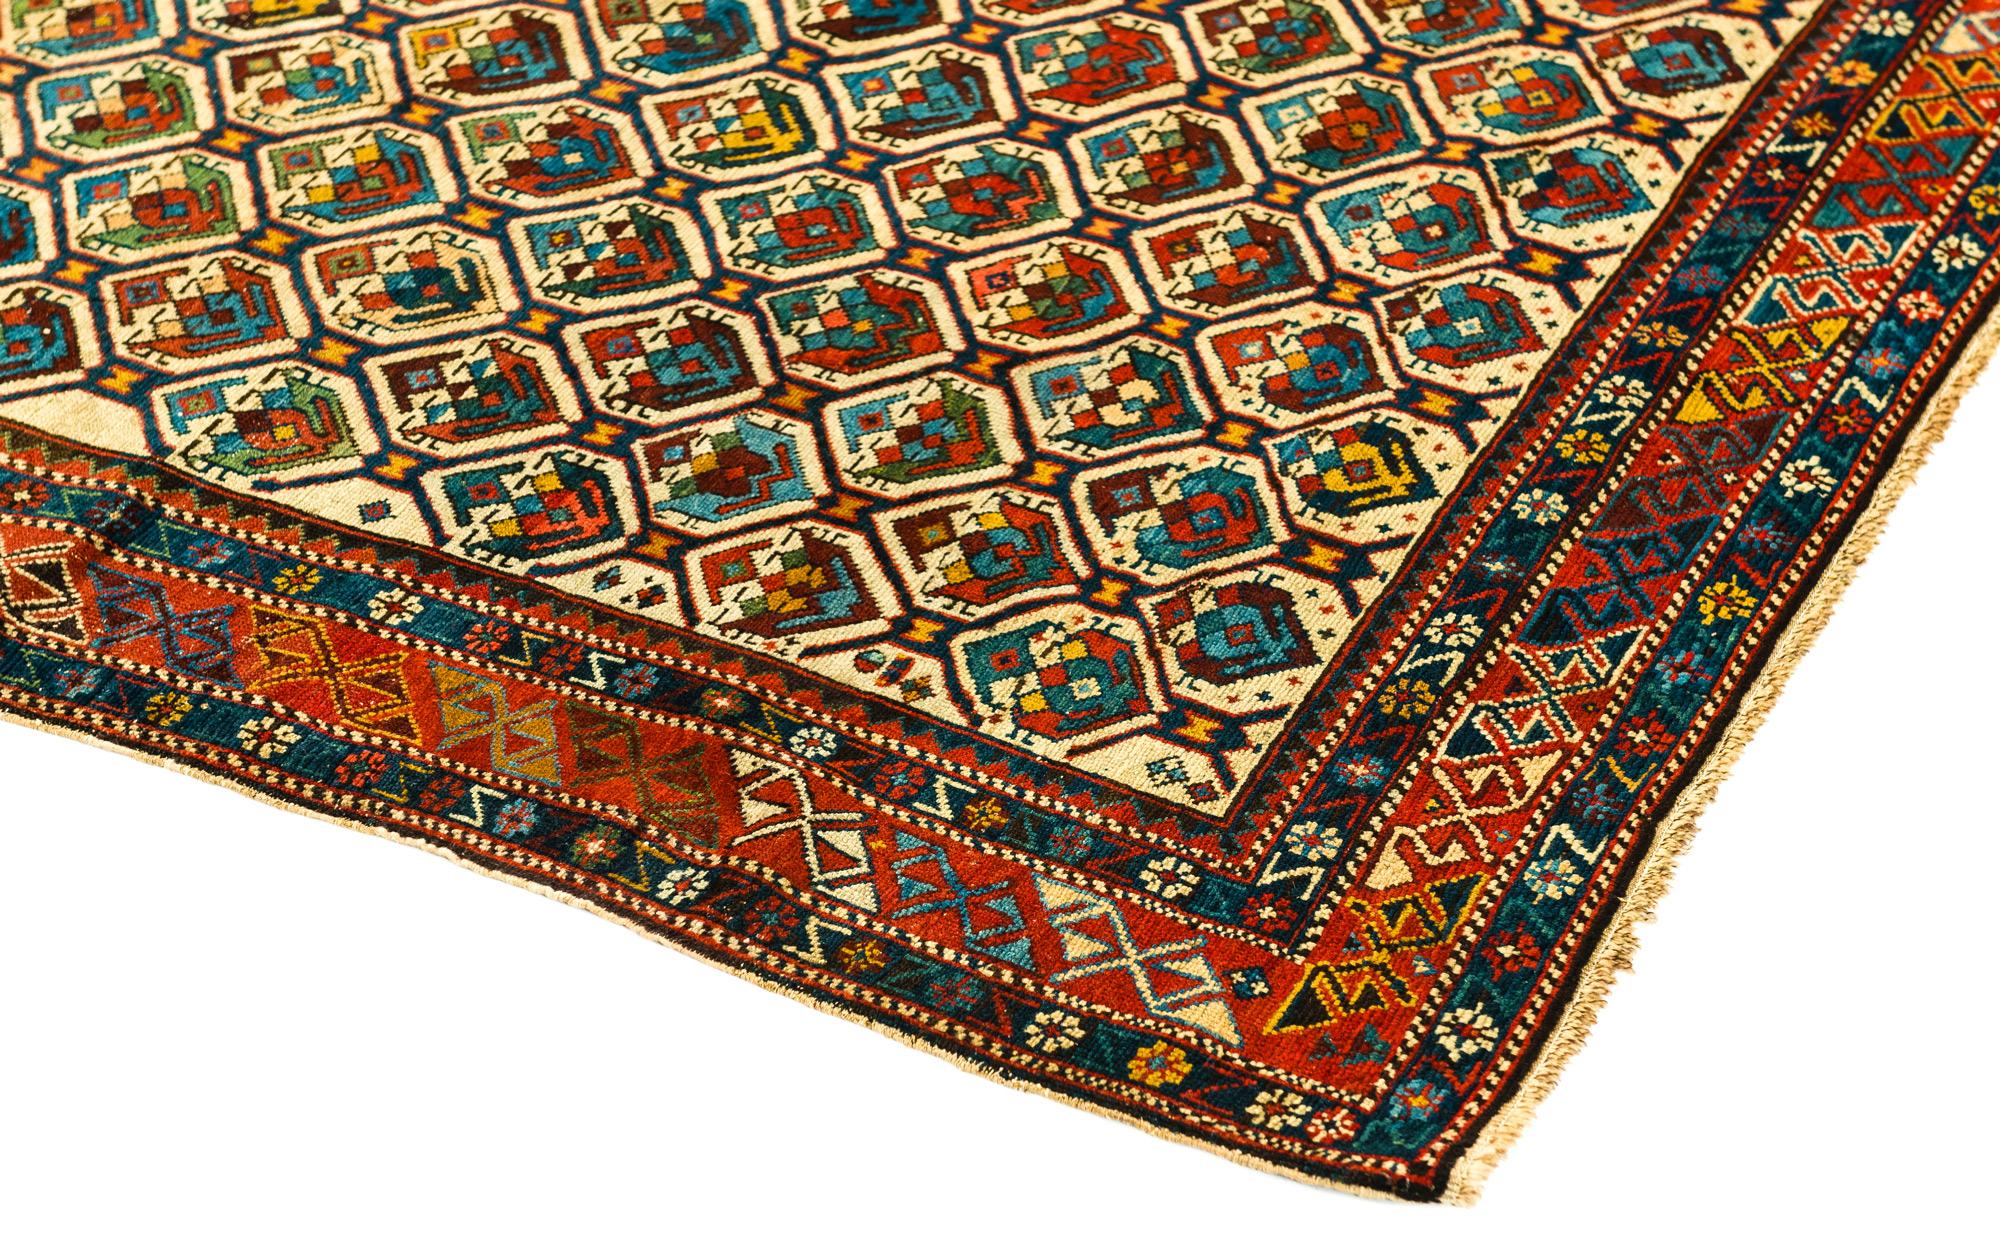 Antique Northeastern Caucasian Shirvan Prayer Rug woven circa 1870.  Geometric and floral design arranged within a honeycomb lattice pattern field. The multi colors create a visually pleasing design.  Size:  3'8 x 4'3